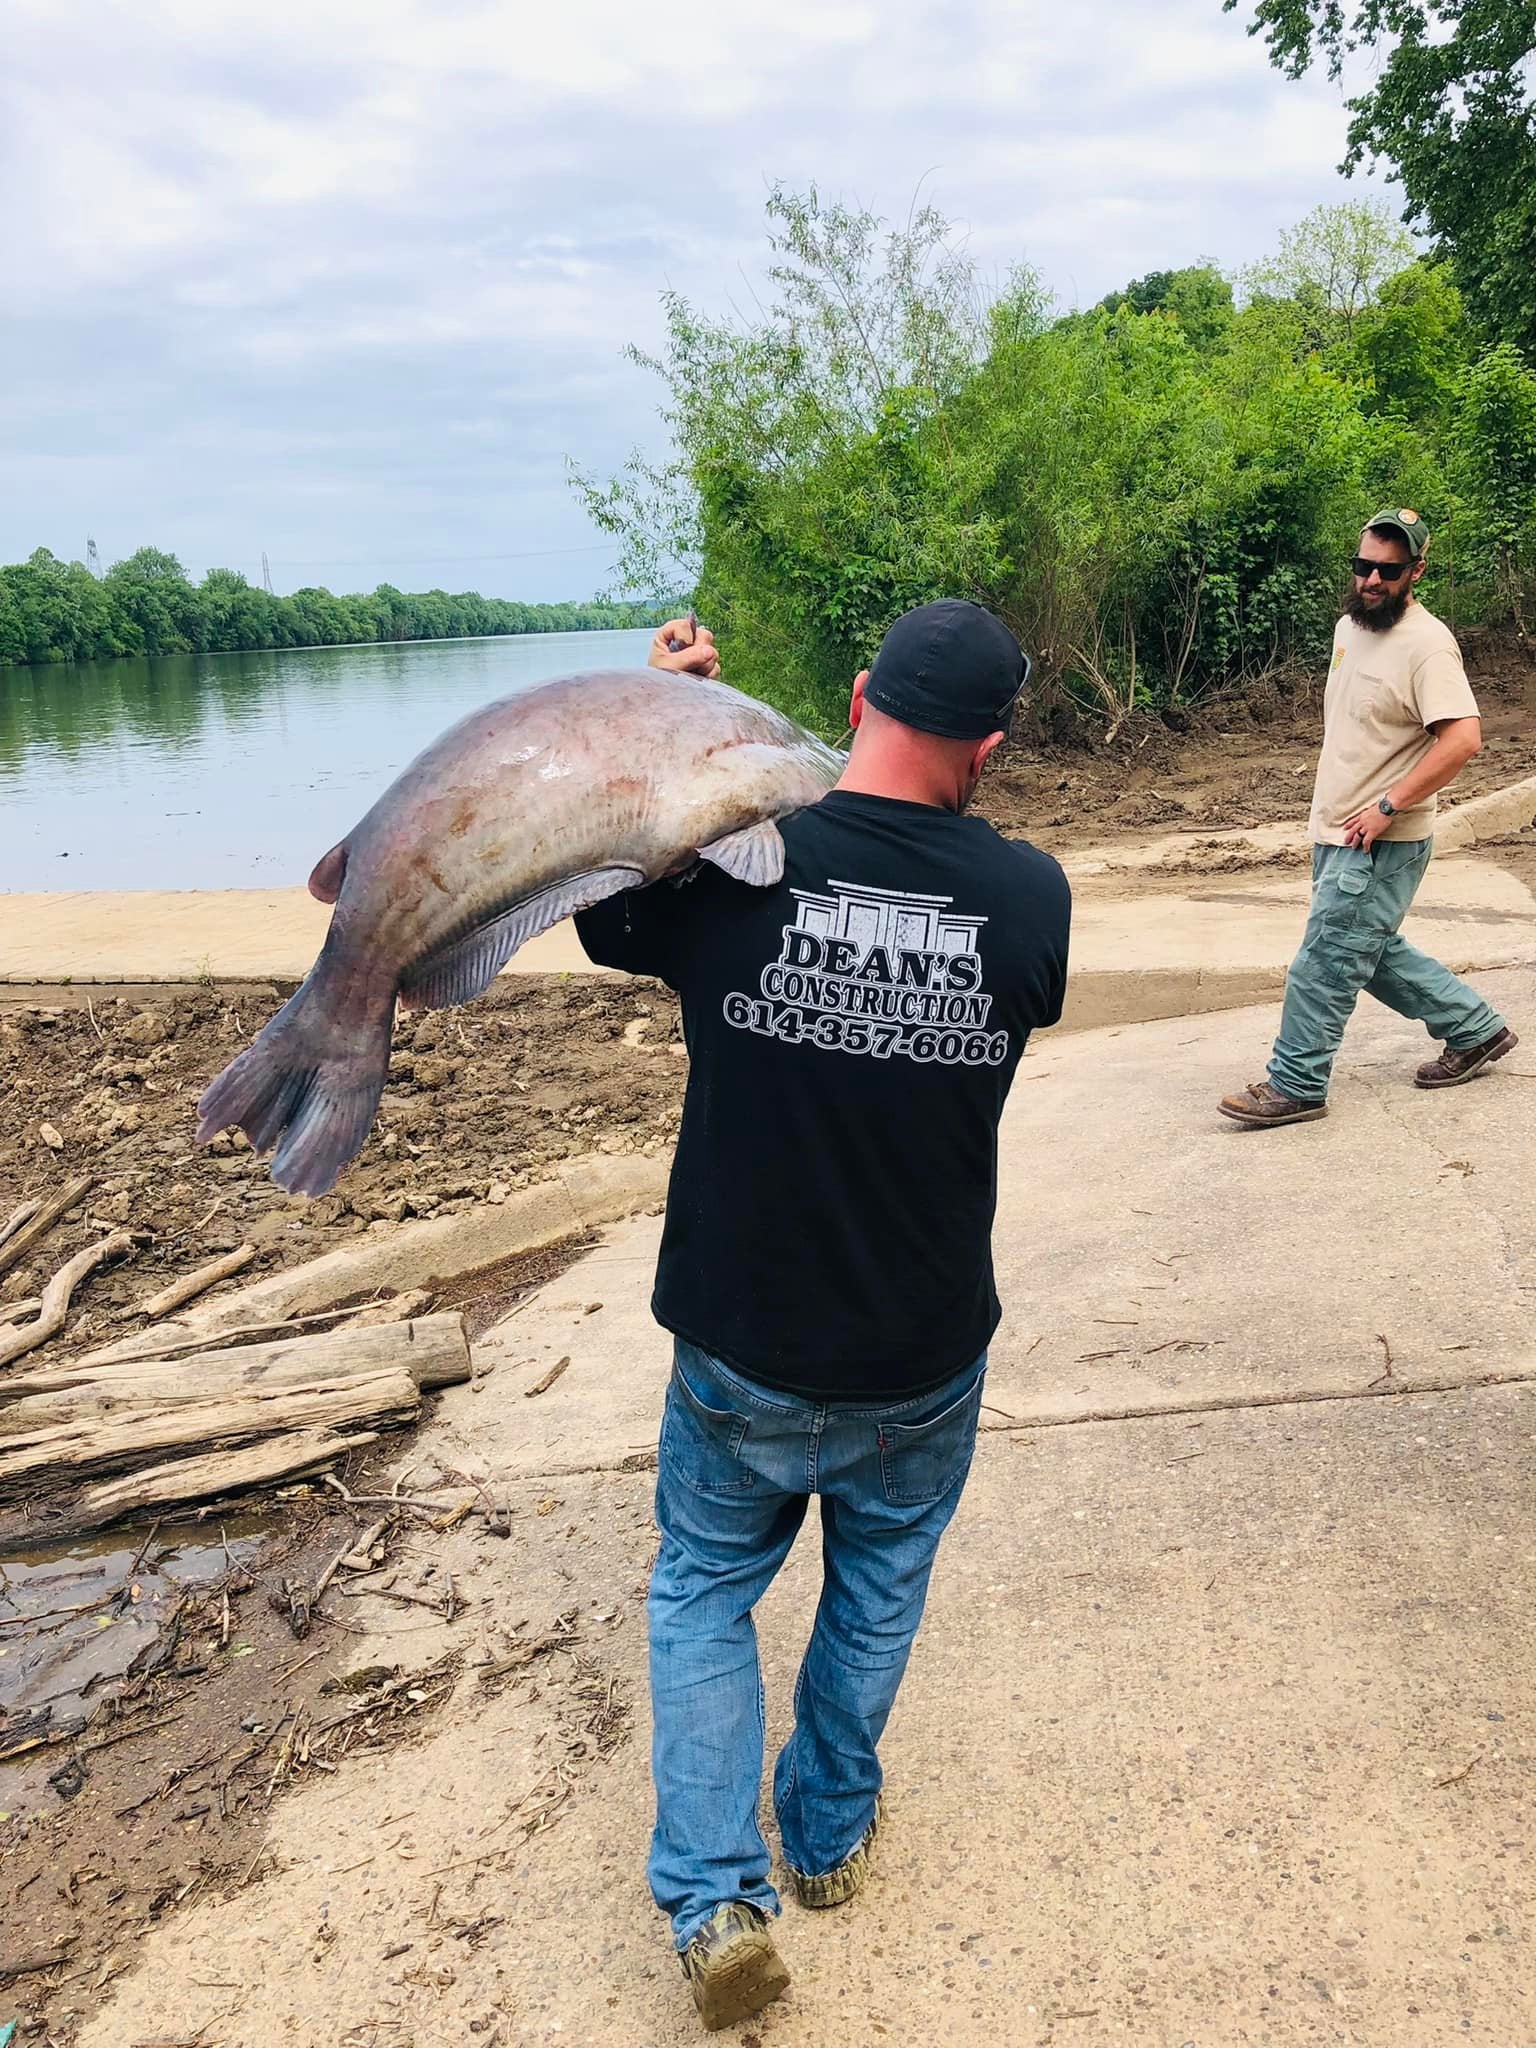 the man throws a big catfish over his shoulder